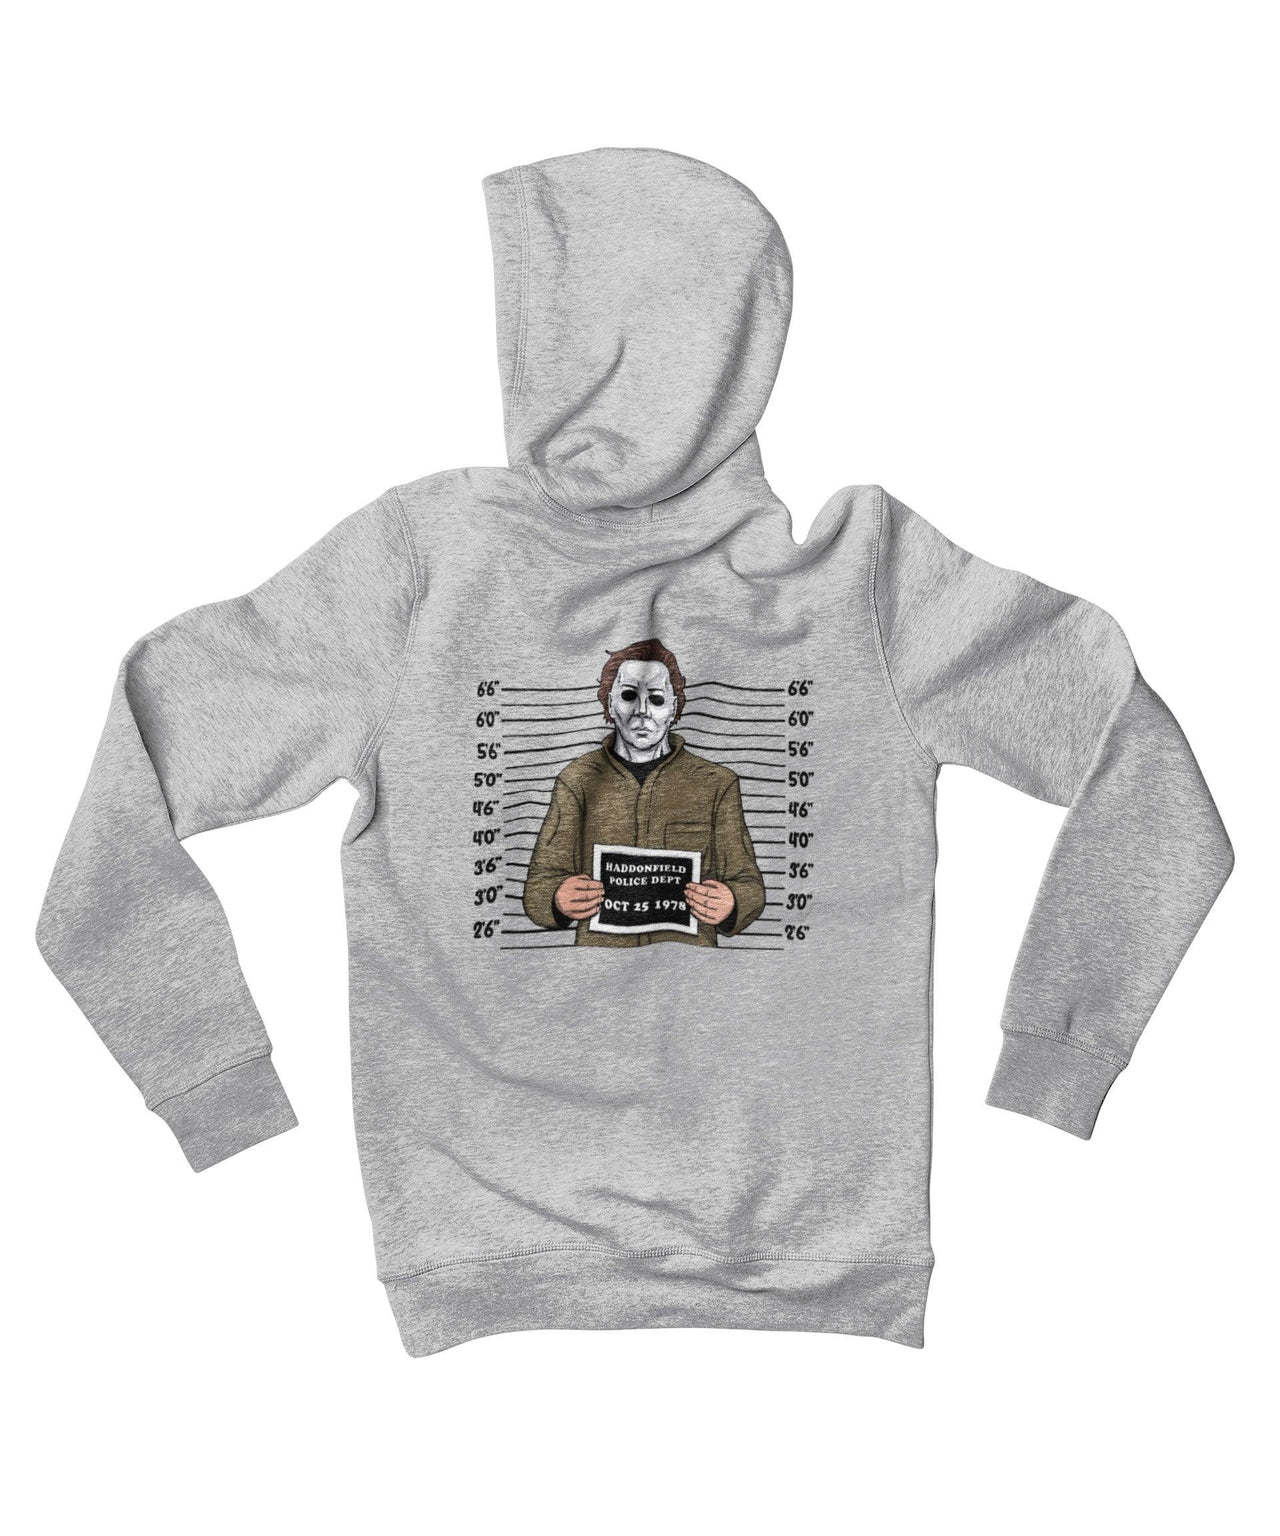 Michael Myers Mugshot Horror Film Tribute Adult Back Printed Hoodie For Men and Women 8Ball